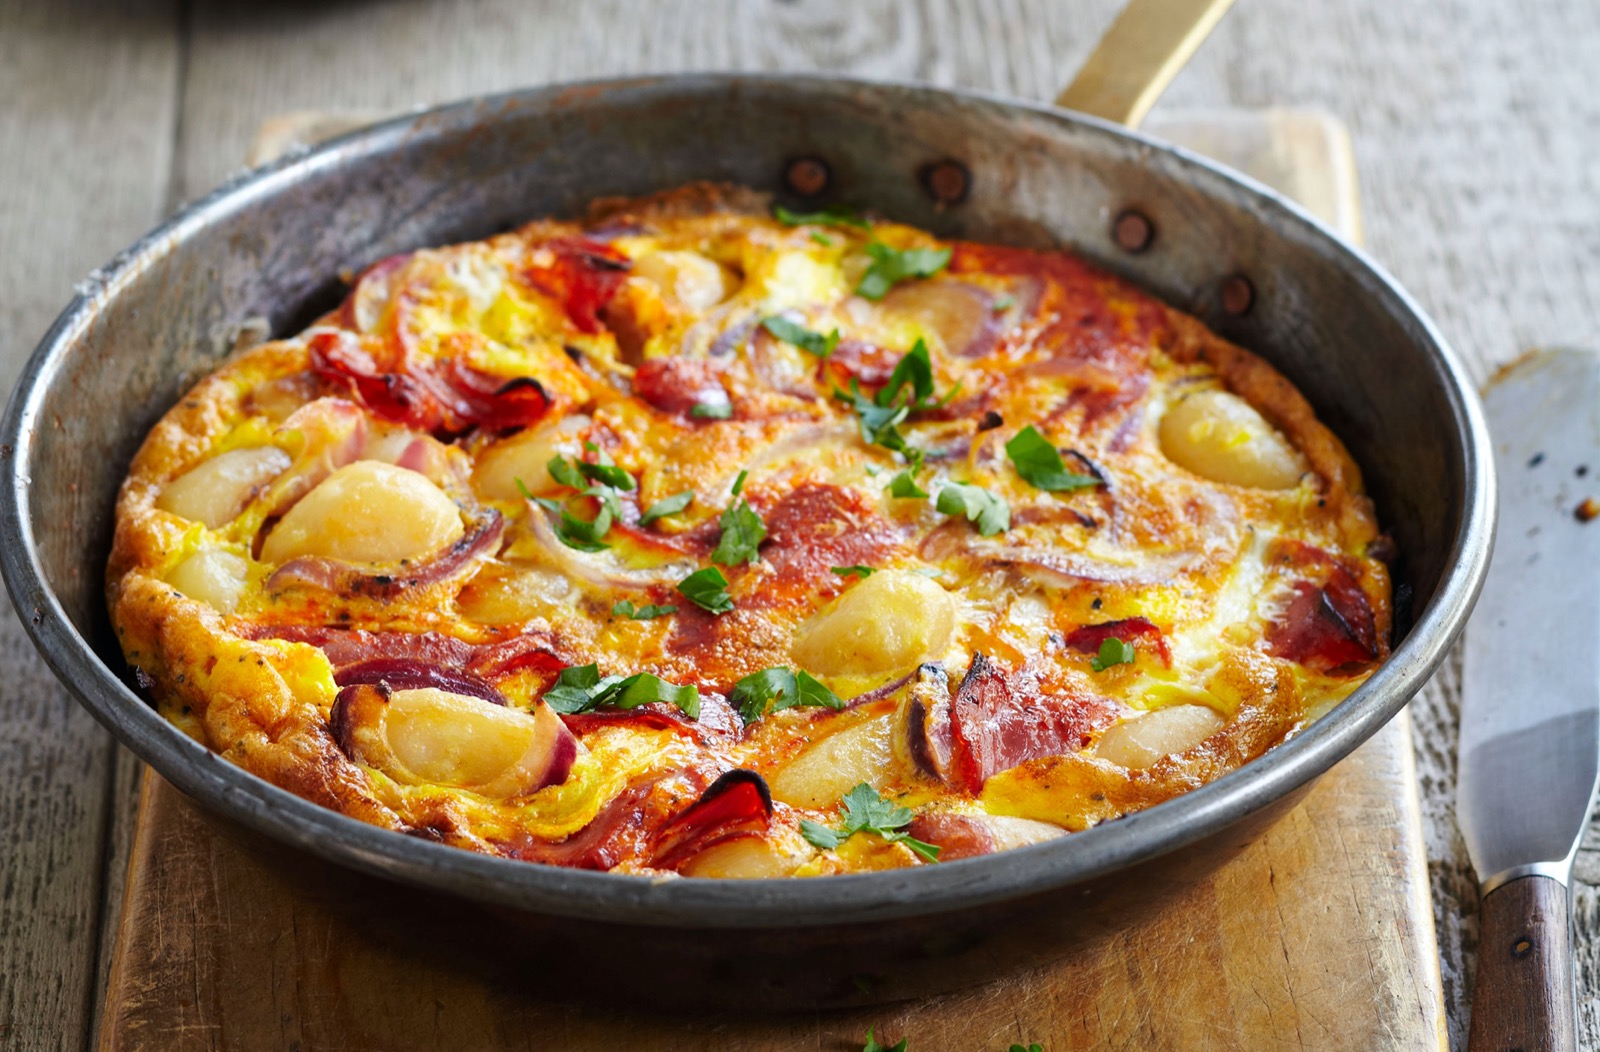 🥞 Sorry, Only Real Foodies Have Eaten at Least 17/24 of These Delicious Brunch Foods Frittata